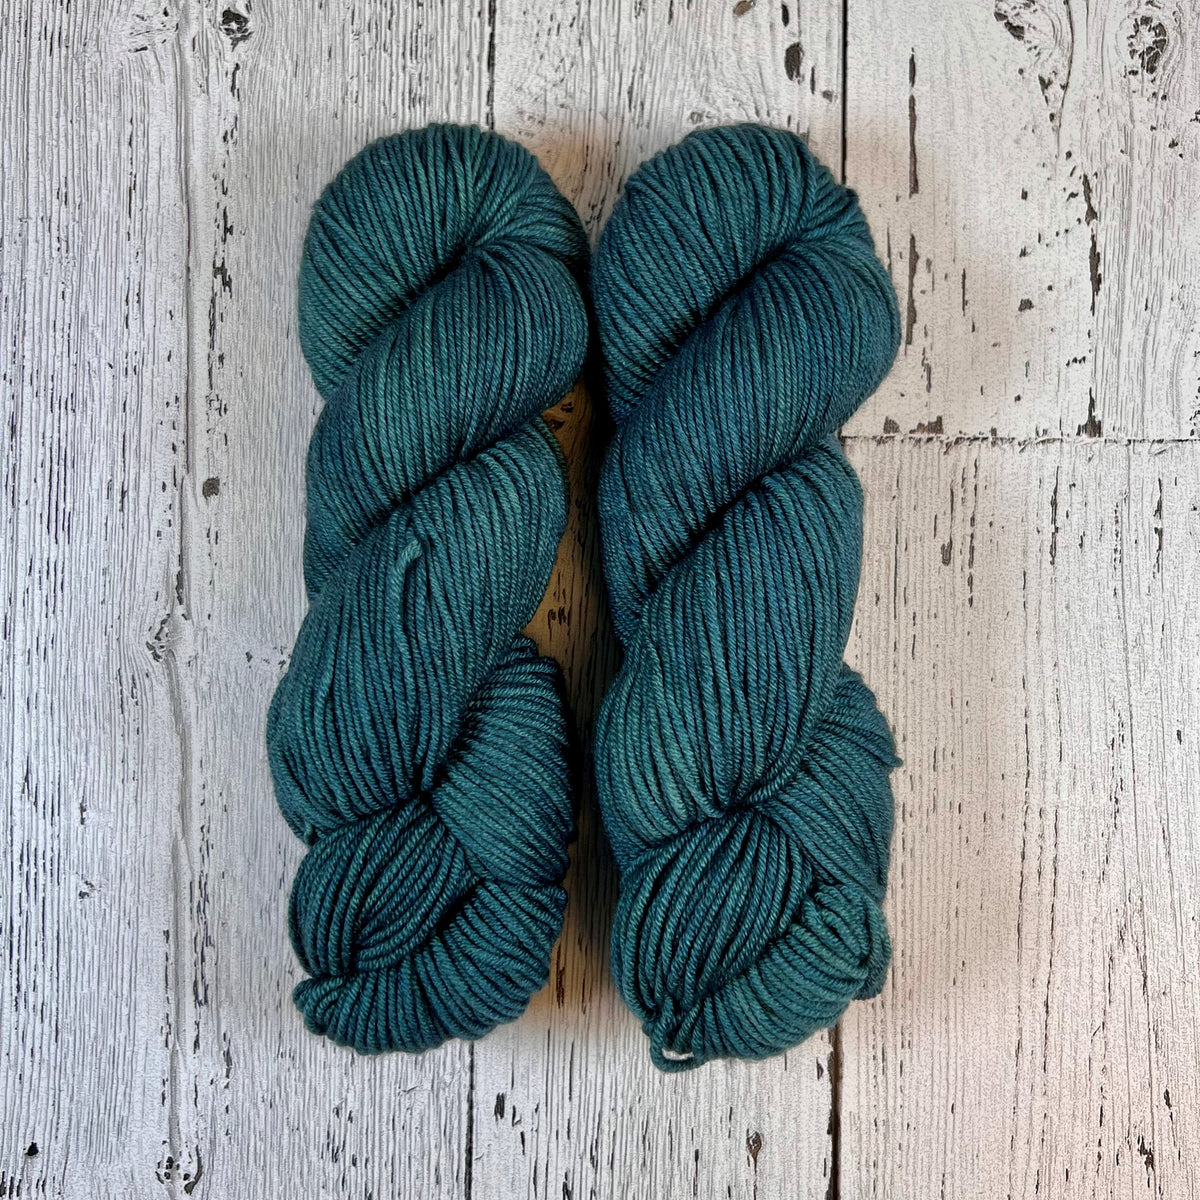 Blue Spruce - Fioritura Worsted - Dyed Stock